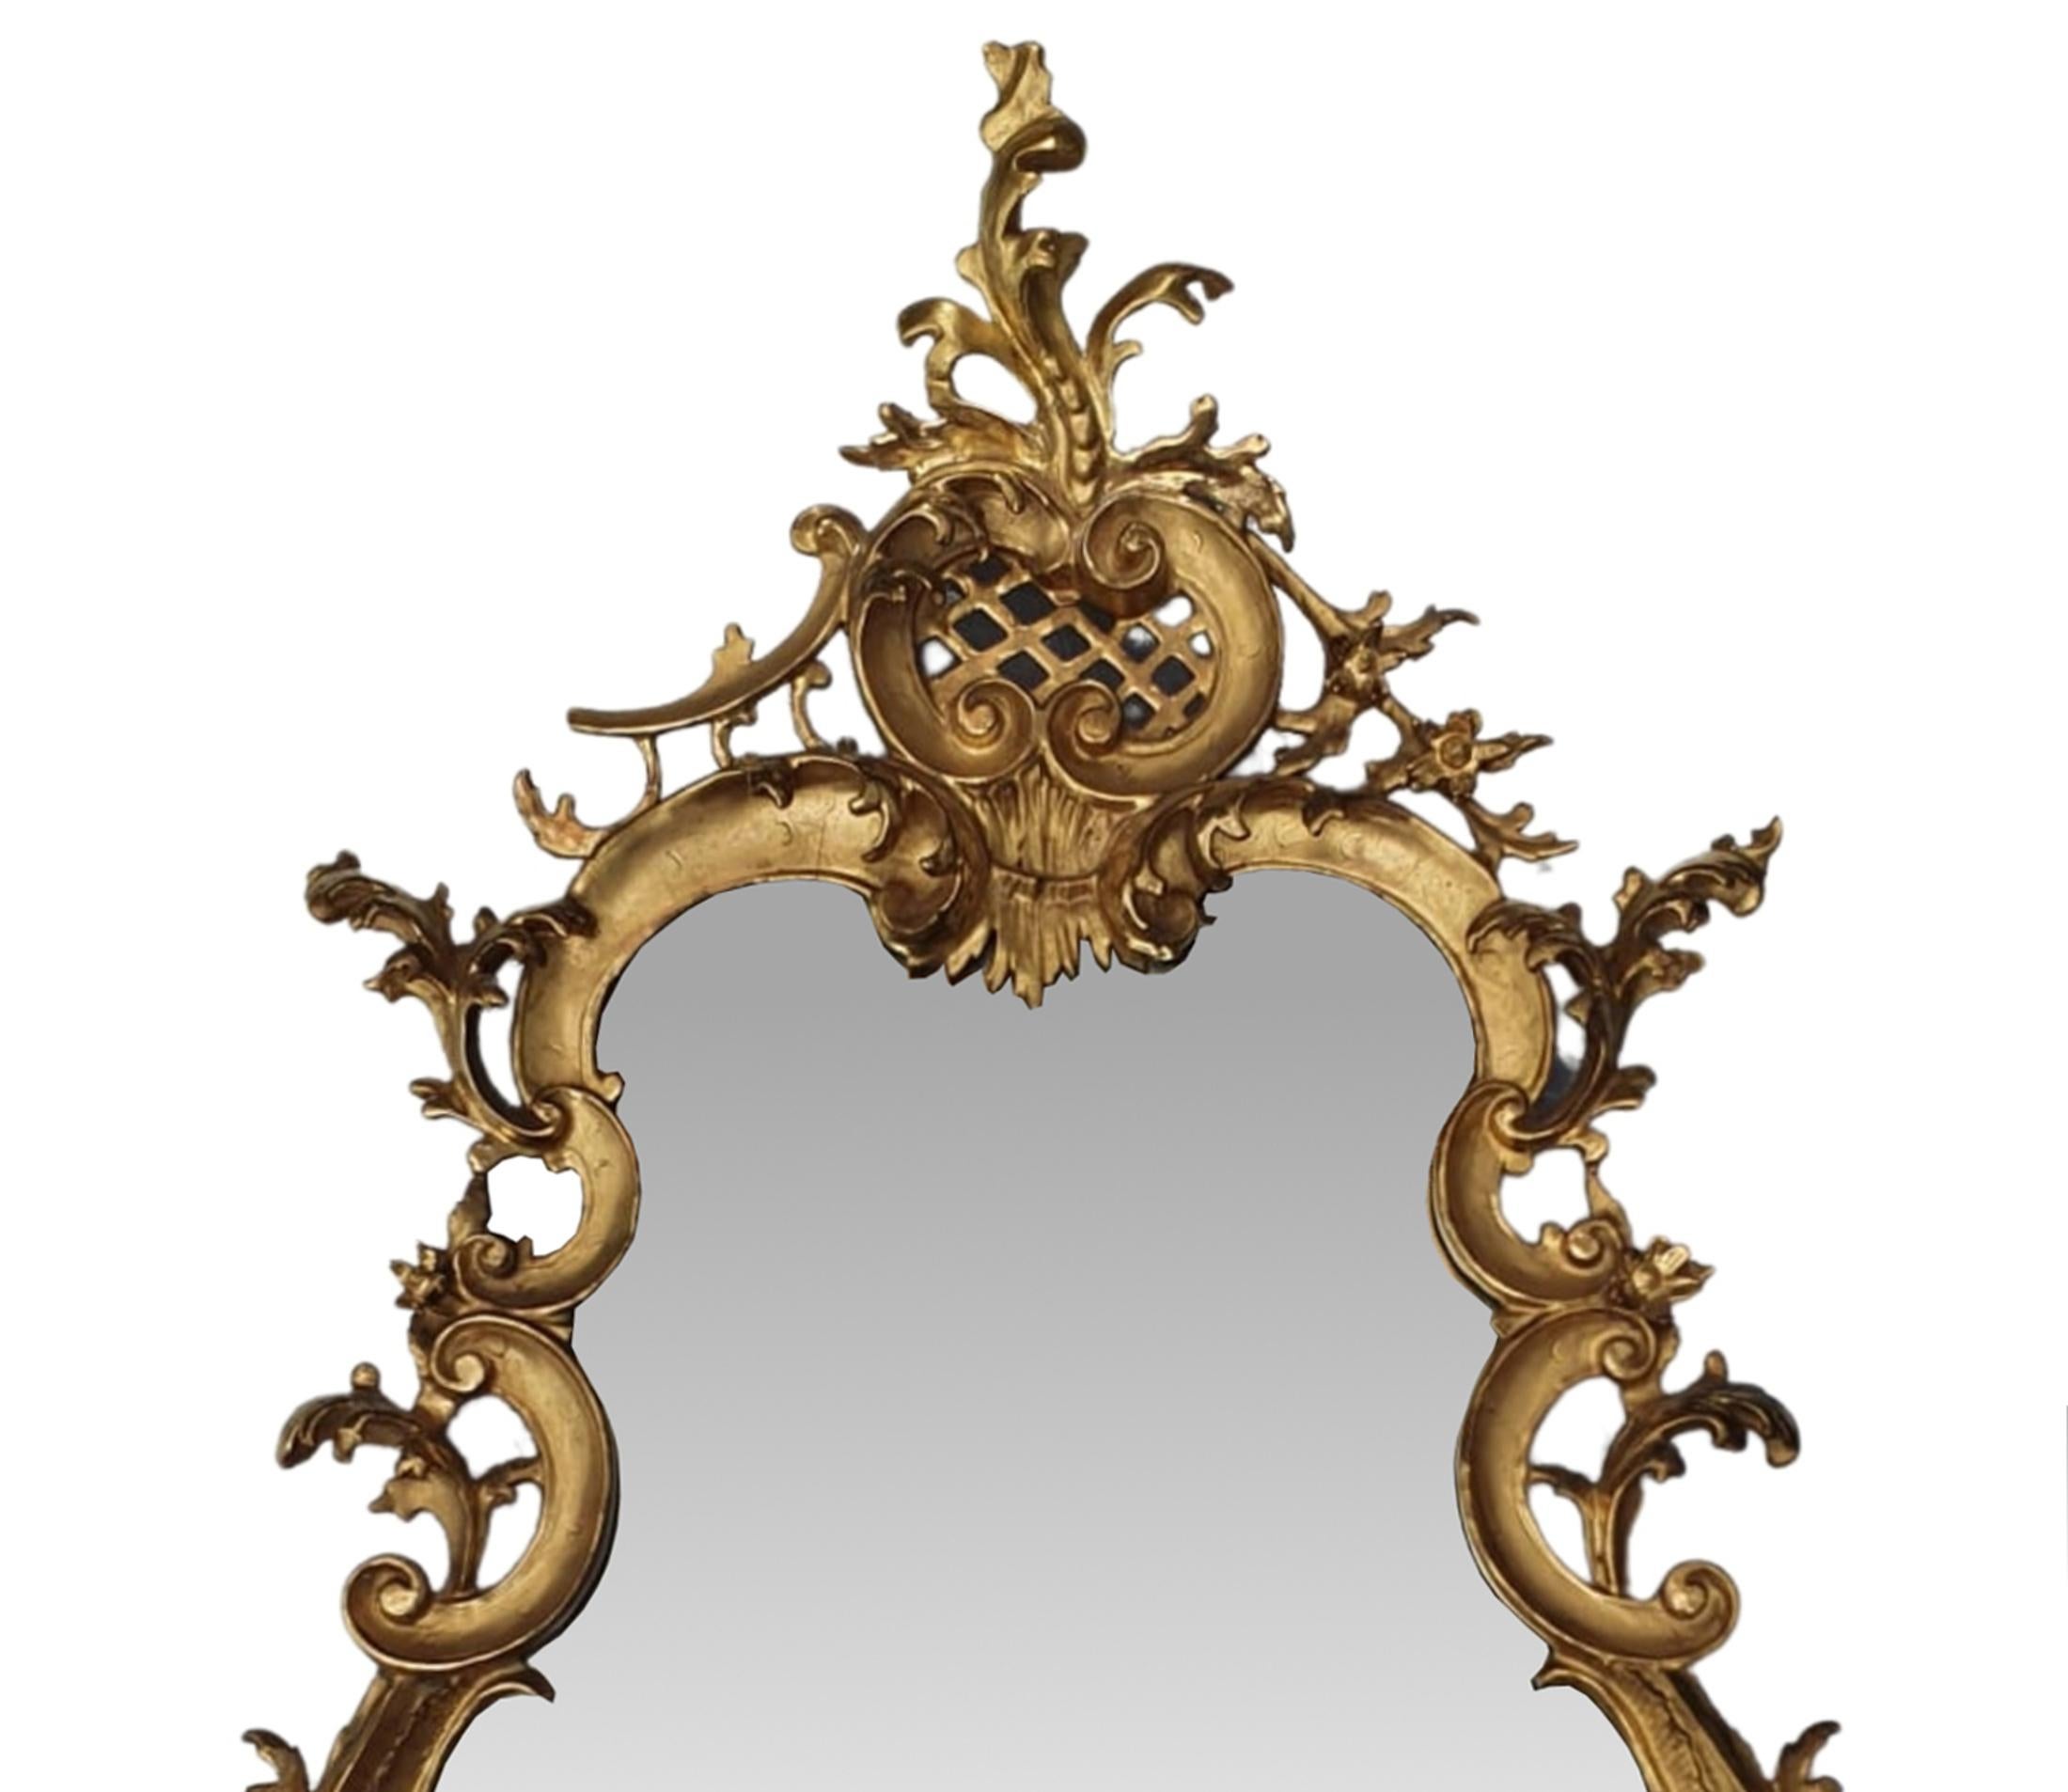 Irish Rare Pair of 19th Century Pier Giltwood Mirrors in the Rococo Manner For Sale